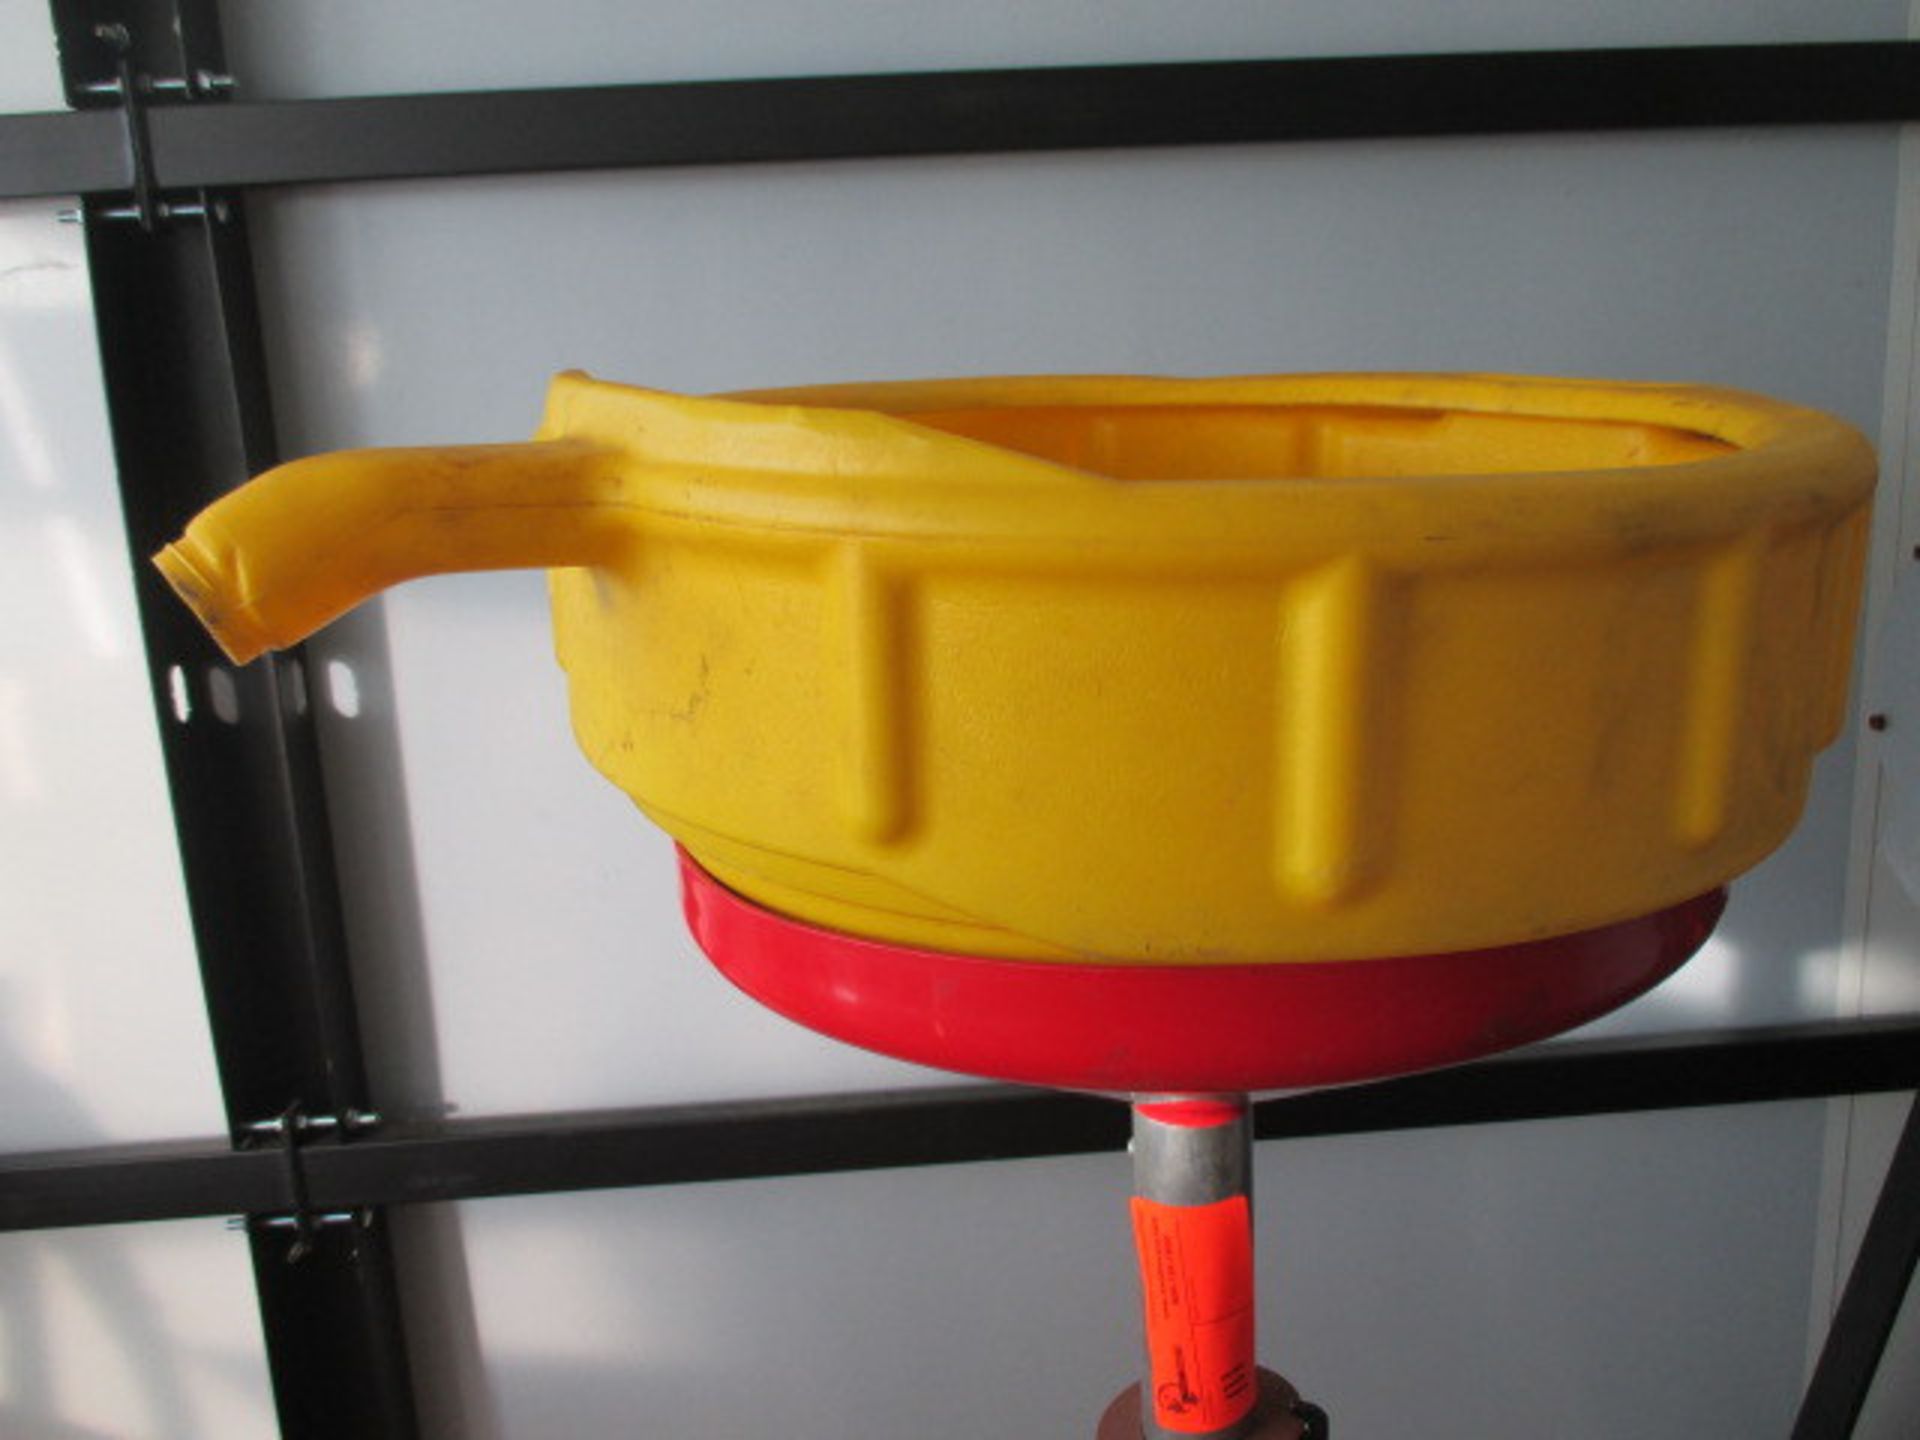 Direct Catch Oil Drainers w/ Yellow Tank on Casters, Adjustable Height Casters, Adjustable Height - Image 2 of 3